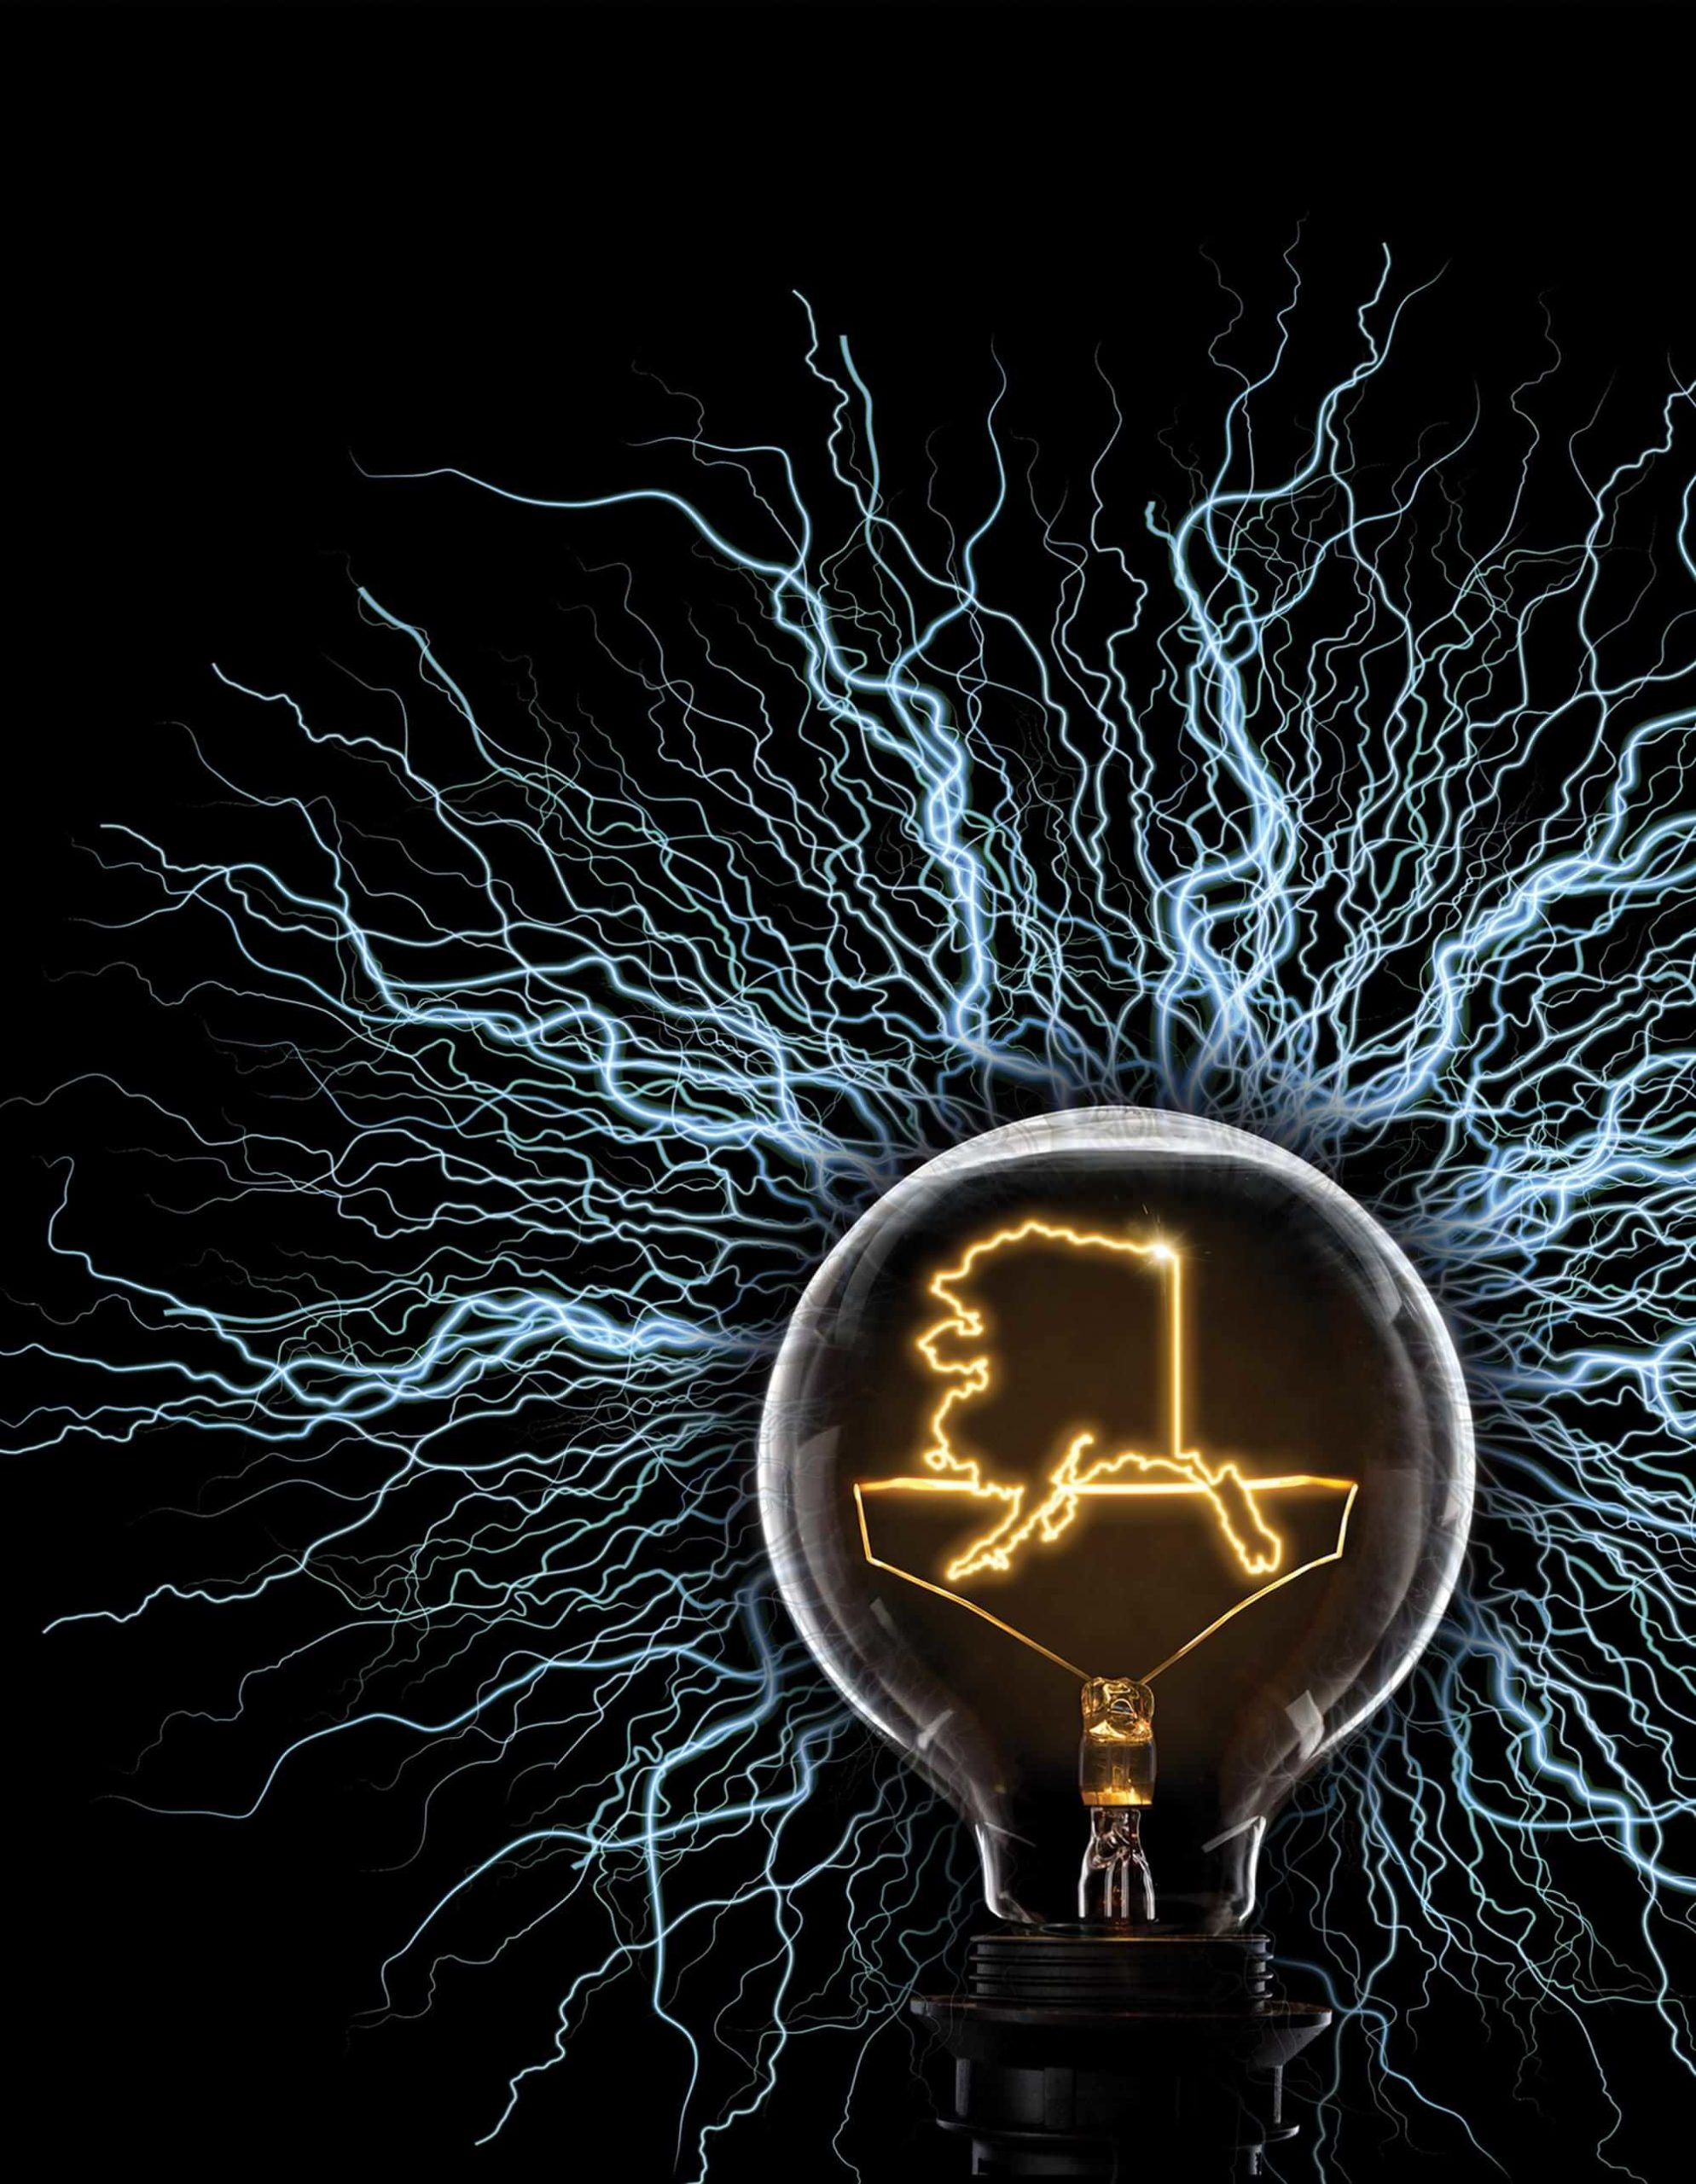 a lightbulb with the Alaskan state illuminated at its center emits many sparks of electricity